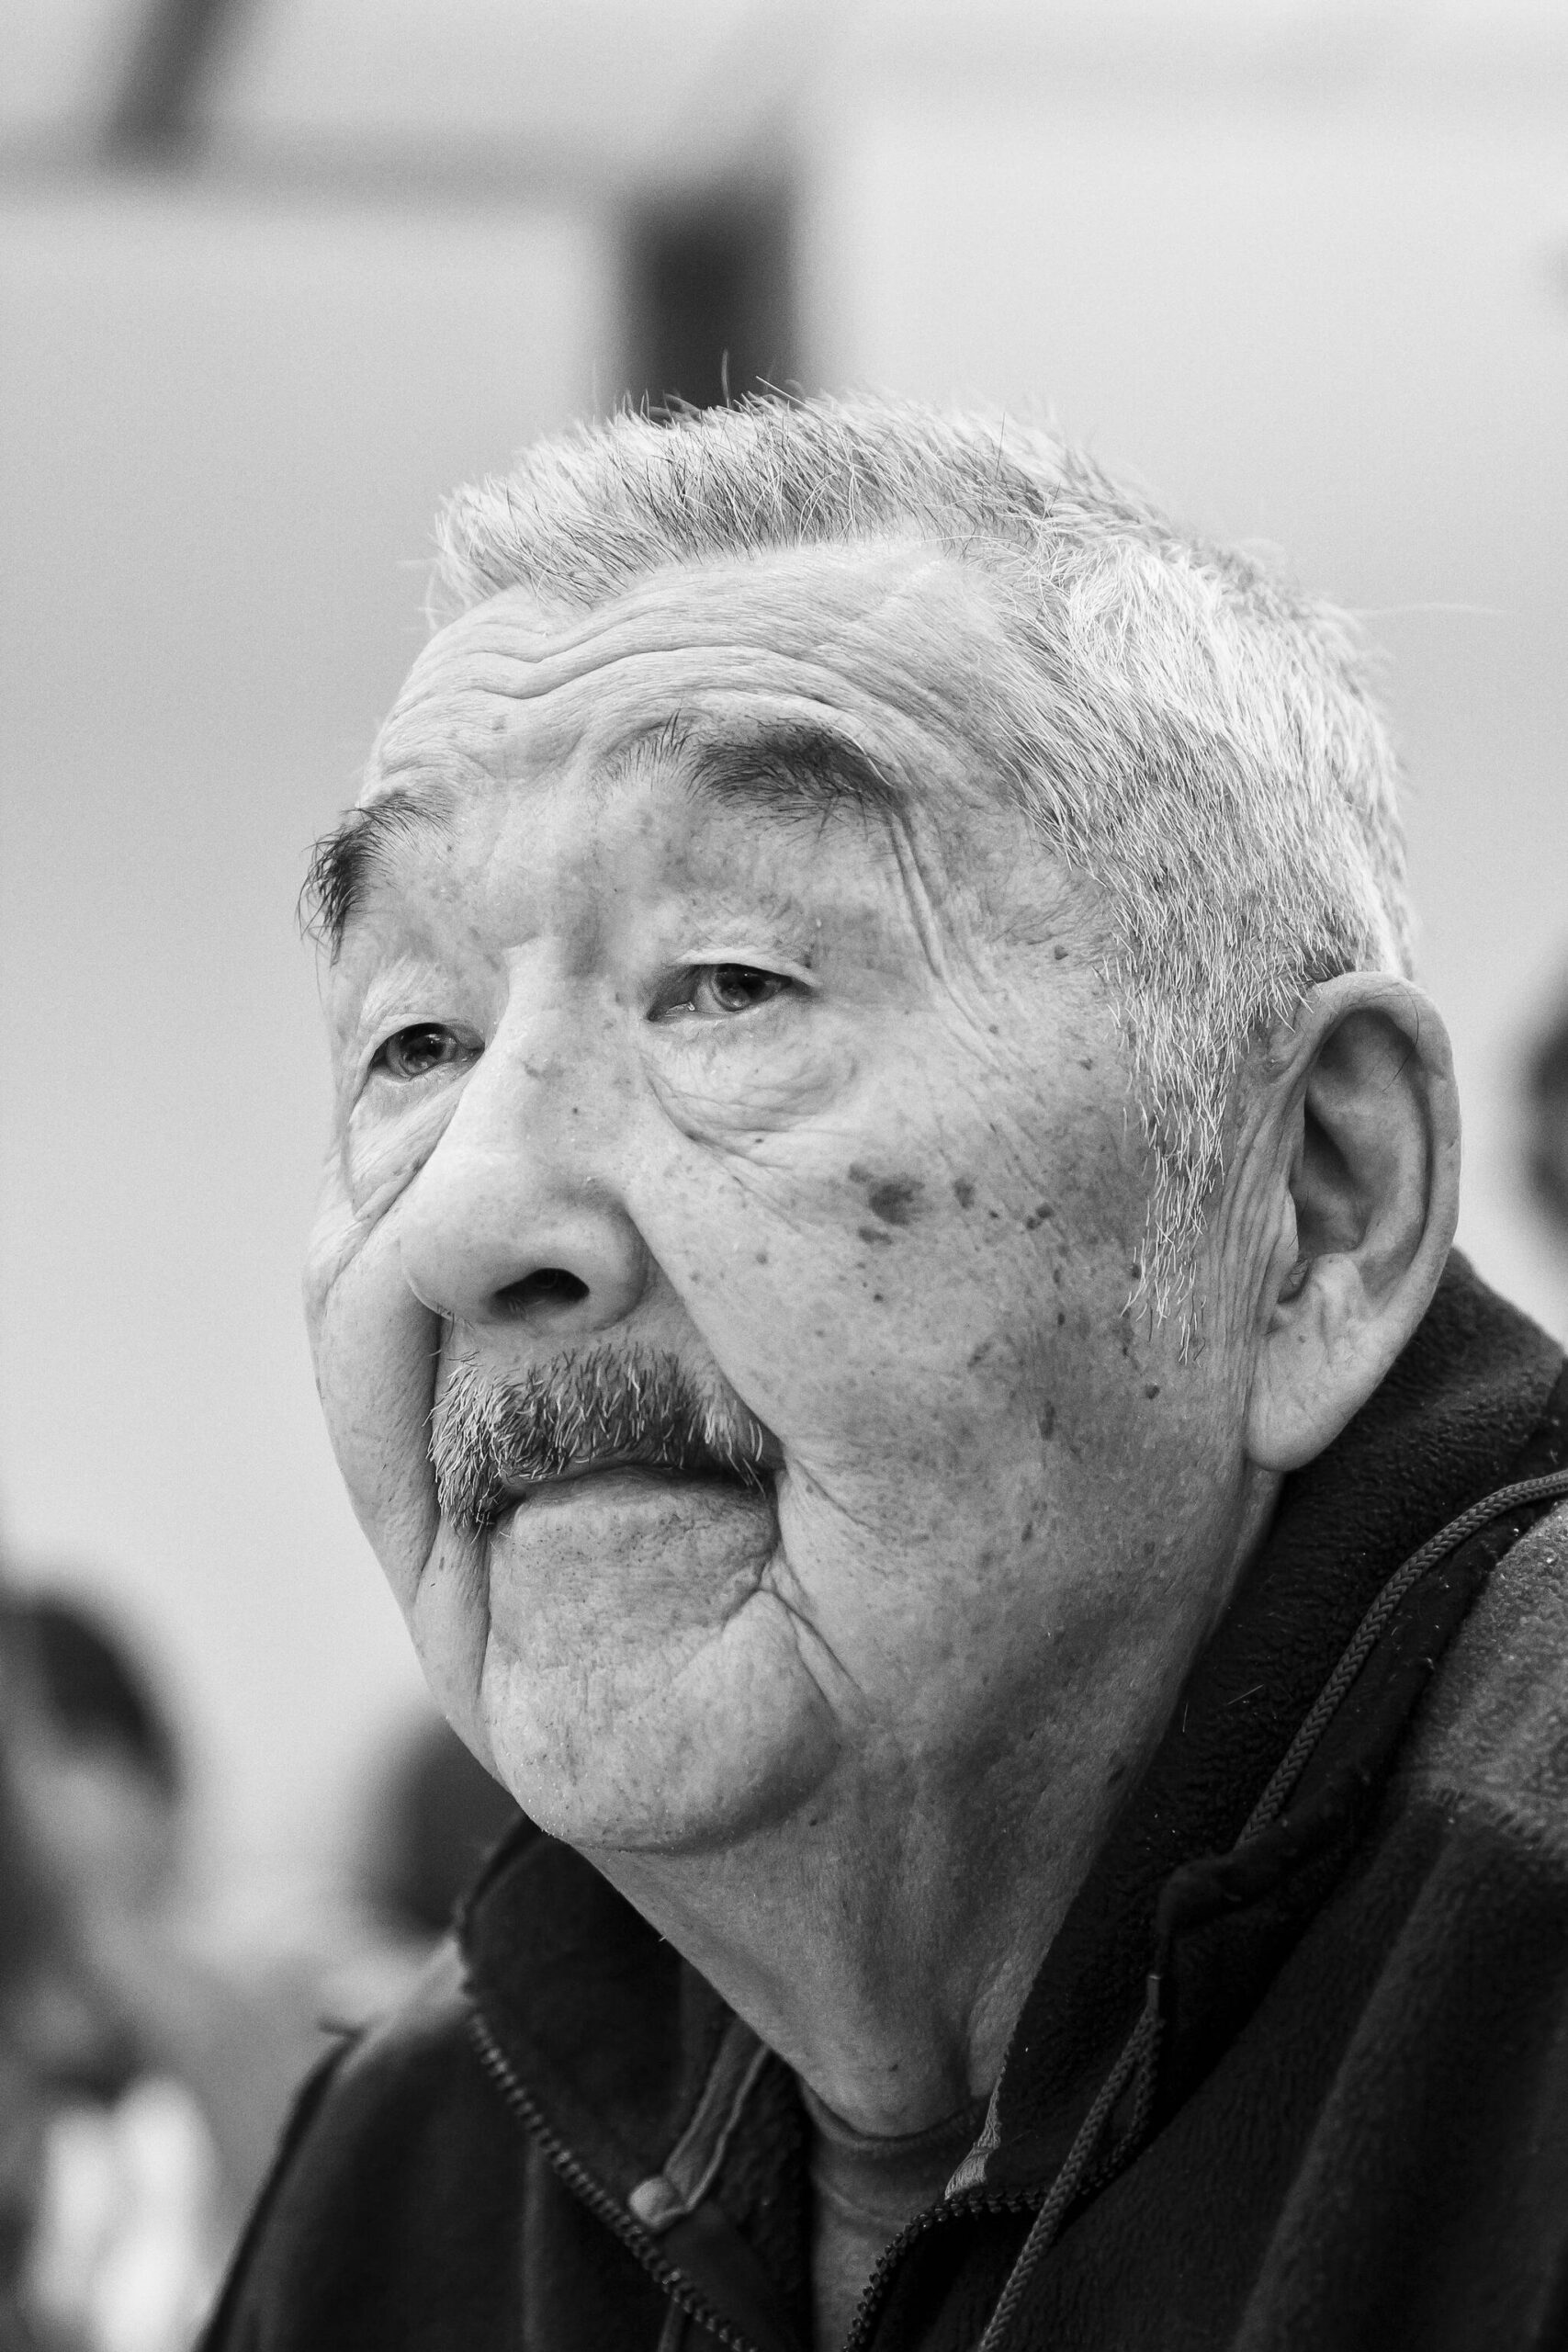 In this photo provided by the U.S. Fish & Wildlife Service, Gregory Golodoff attends a reunion in Alaska, May 18, 2018. Golodoff, who was 3 years old when his remote Alaska island was captured by Japanese troops and who became the last survivor among its 41 residents sent to Japan as prisoners, died Nov. 17, 2023. The island of Attu in the Aleutian chain was one of just a few U.S. territories taken by enemy forces during the war, and the American effort to reclaim it amid frigid rain, dense fog and hurricane-force winds was the only battle of the war fought on North American soil. (Lisa Hupp/USFWS via AP)